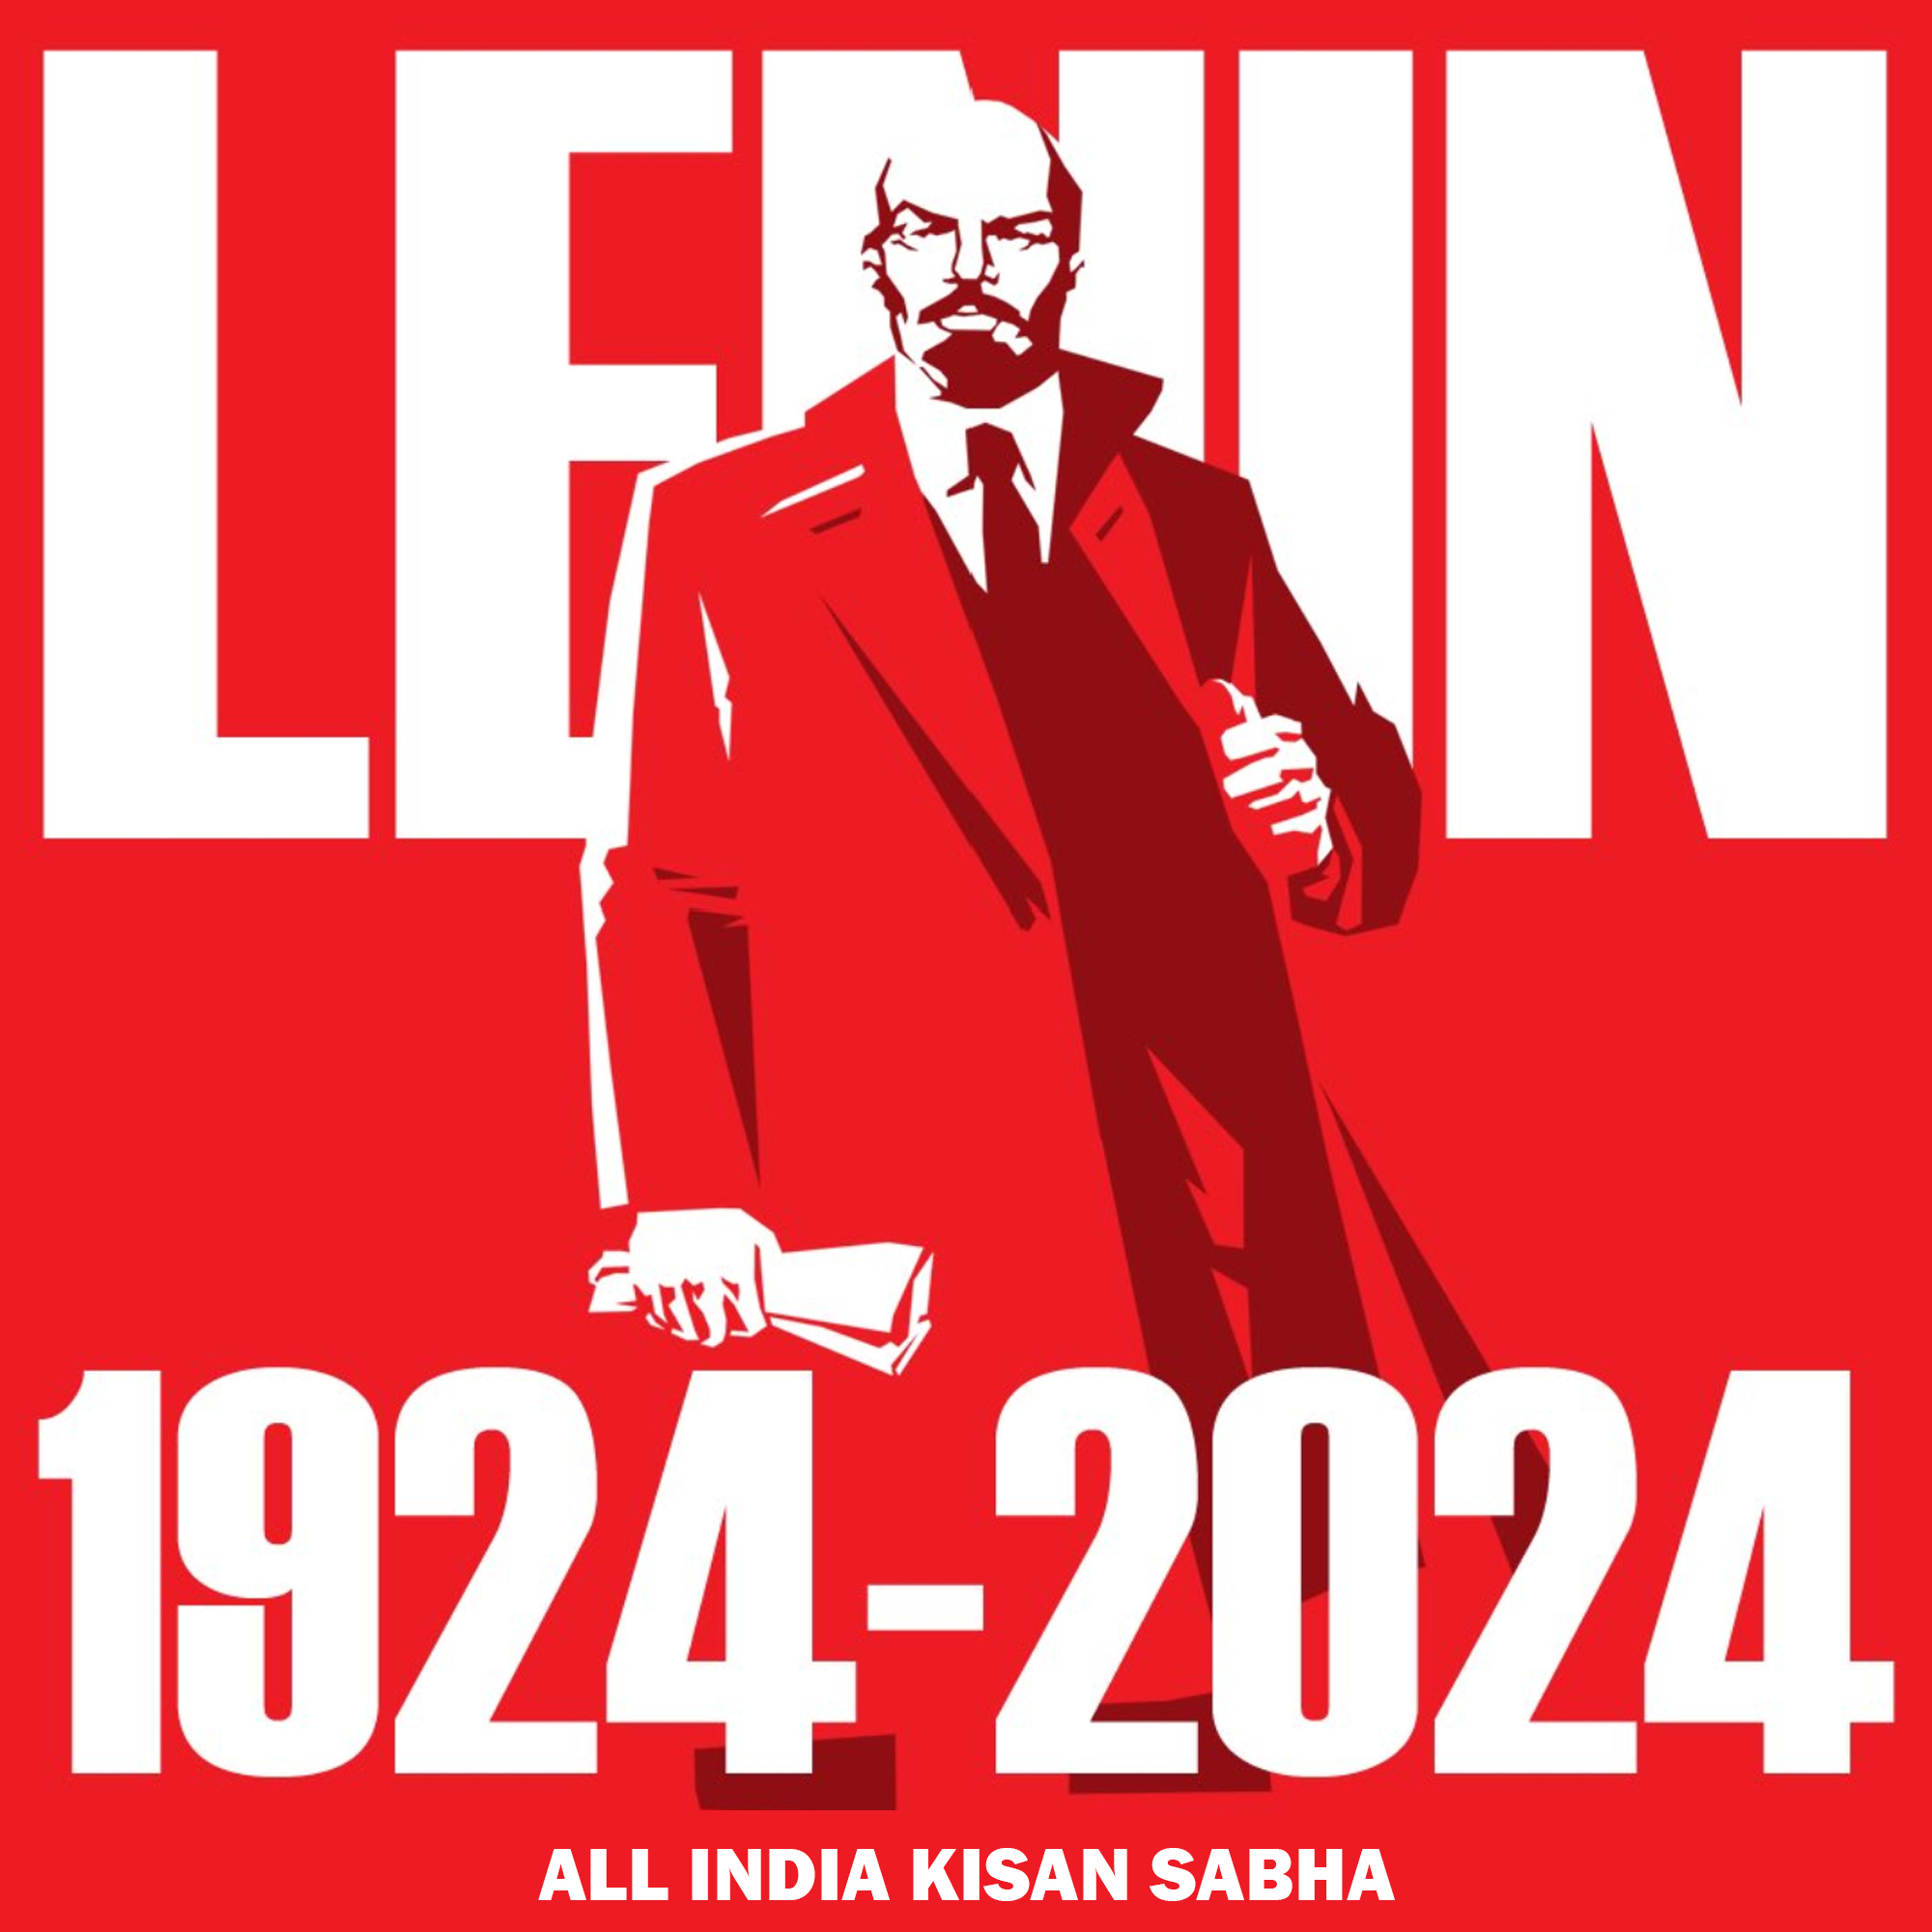 Lenin: Architect of the Worker-Peasant Alliance